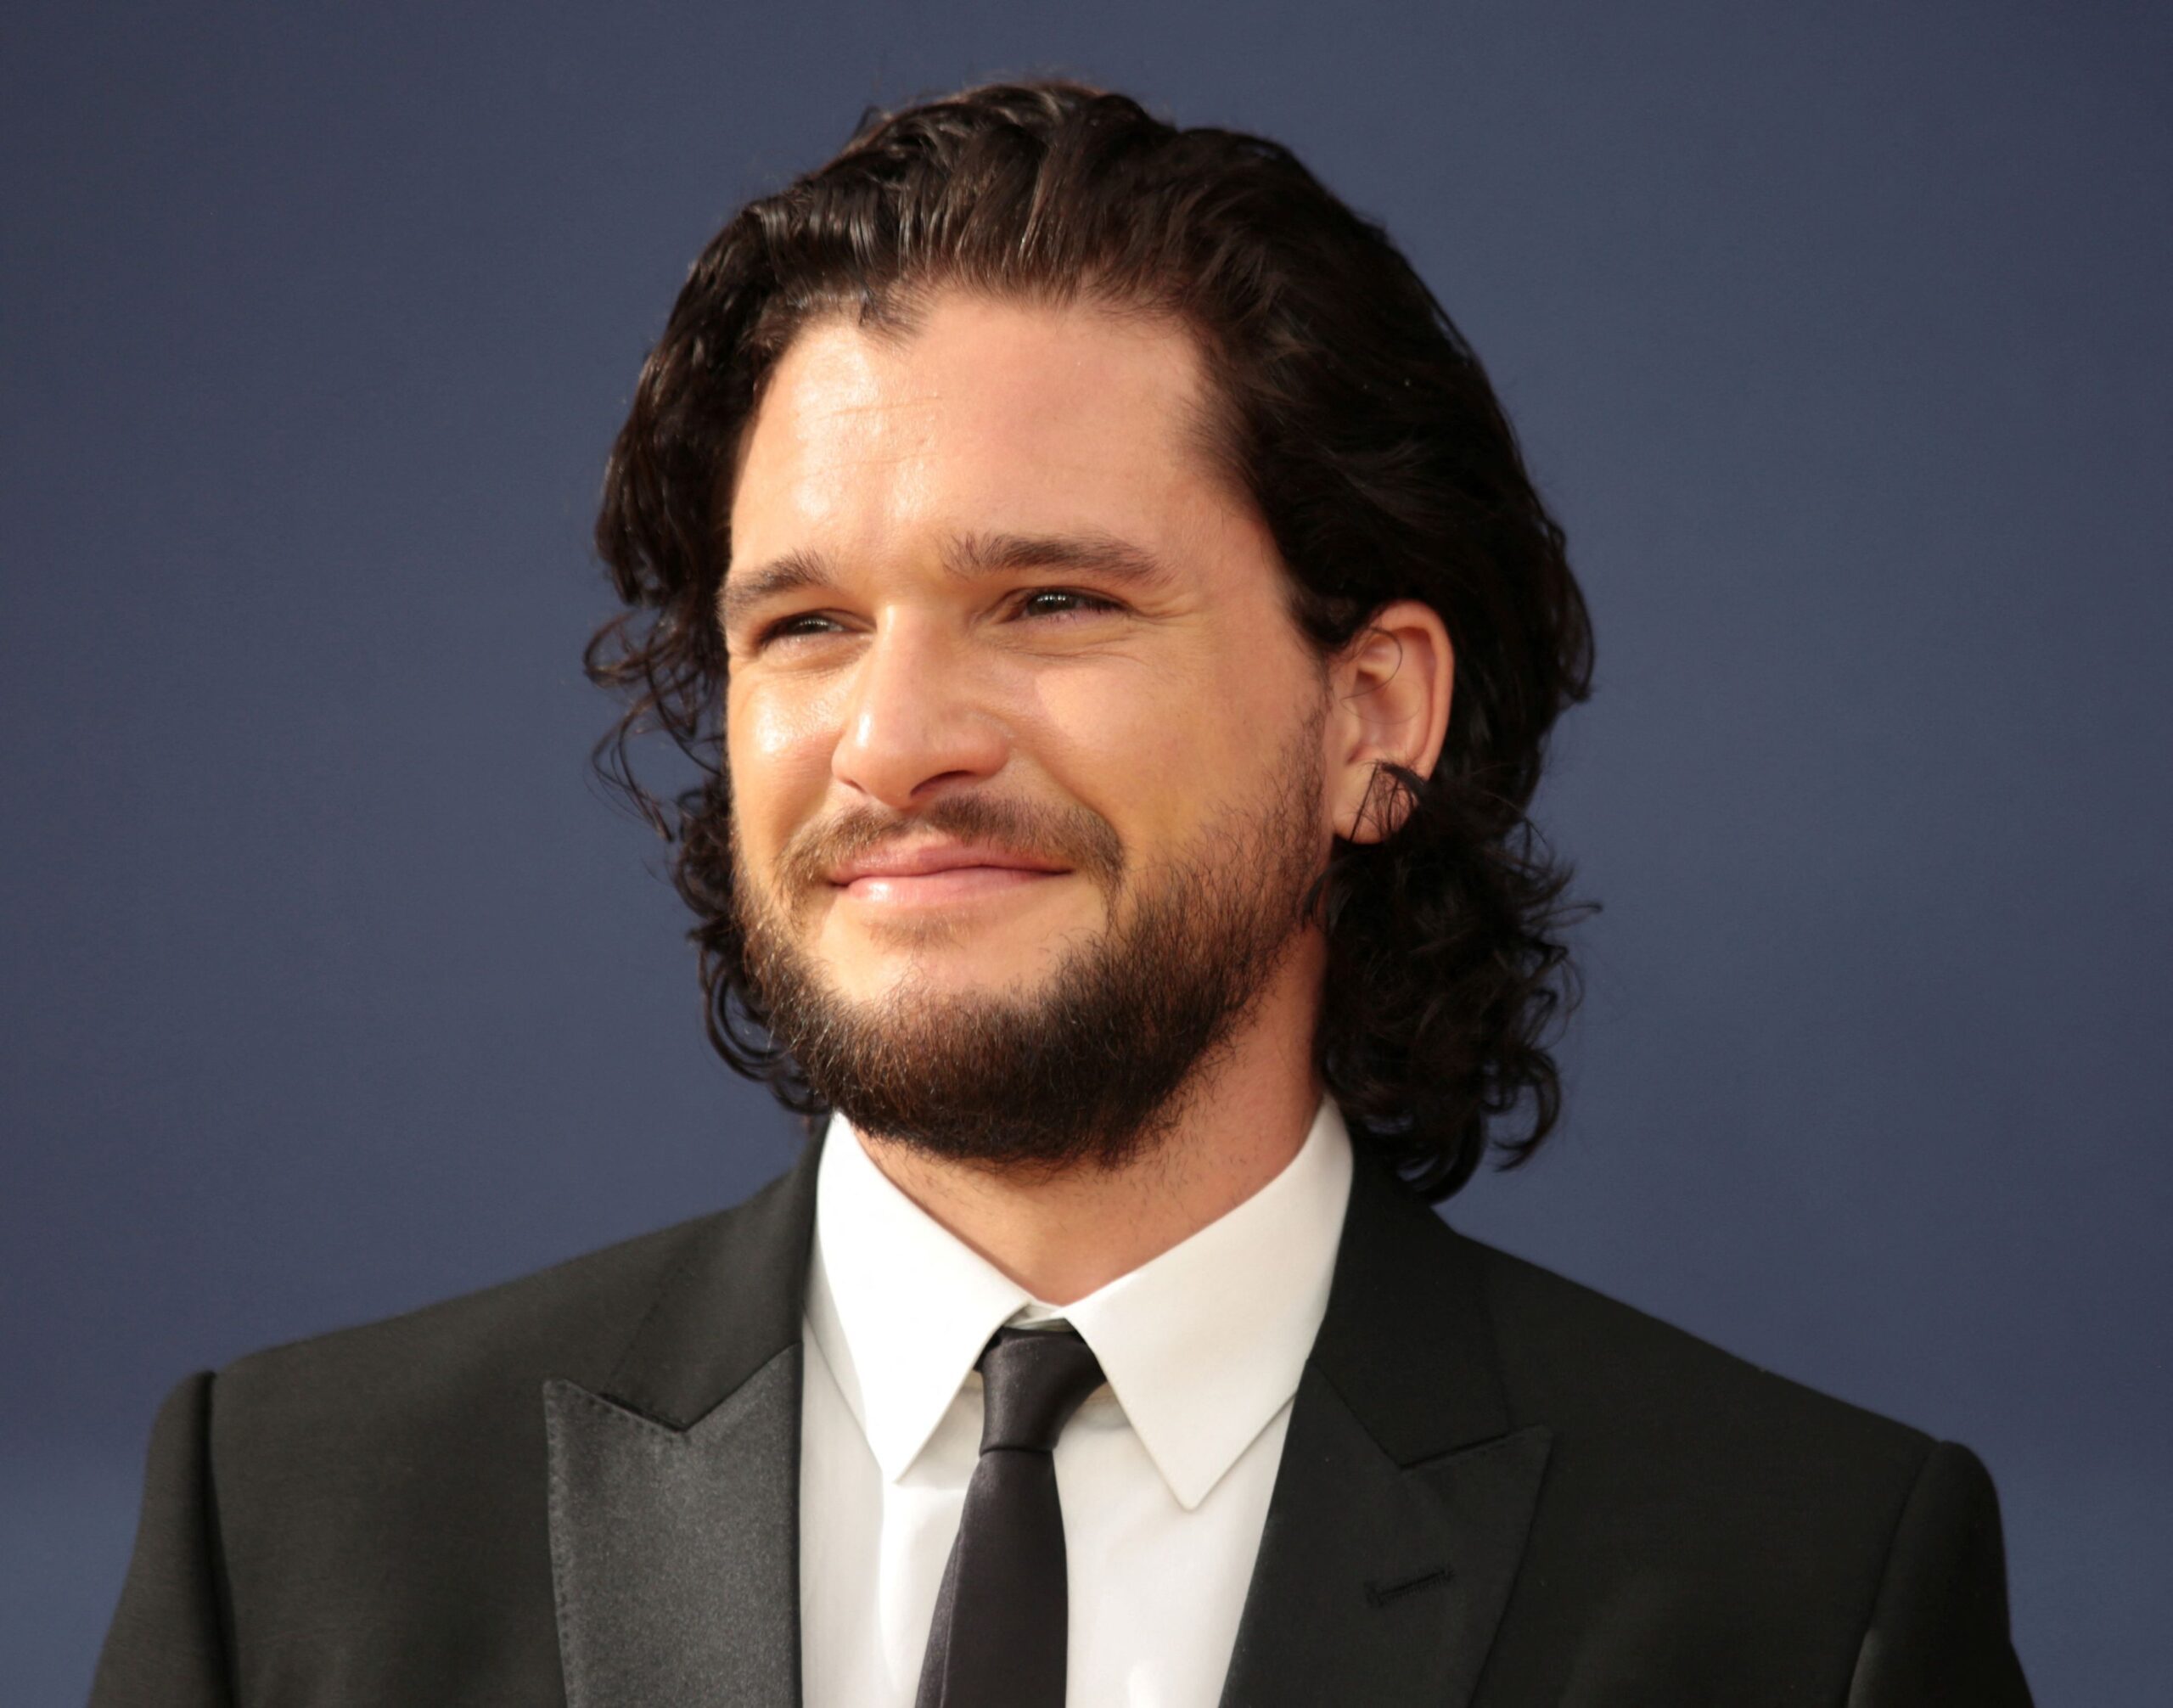 Kit Harington confirmed for Jon Snow spin-off, ‘Game of Thrones’ co-star says